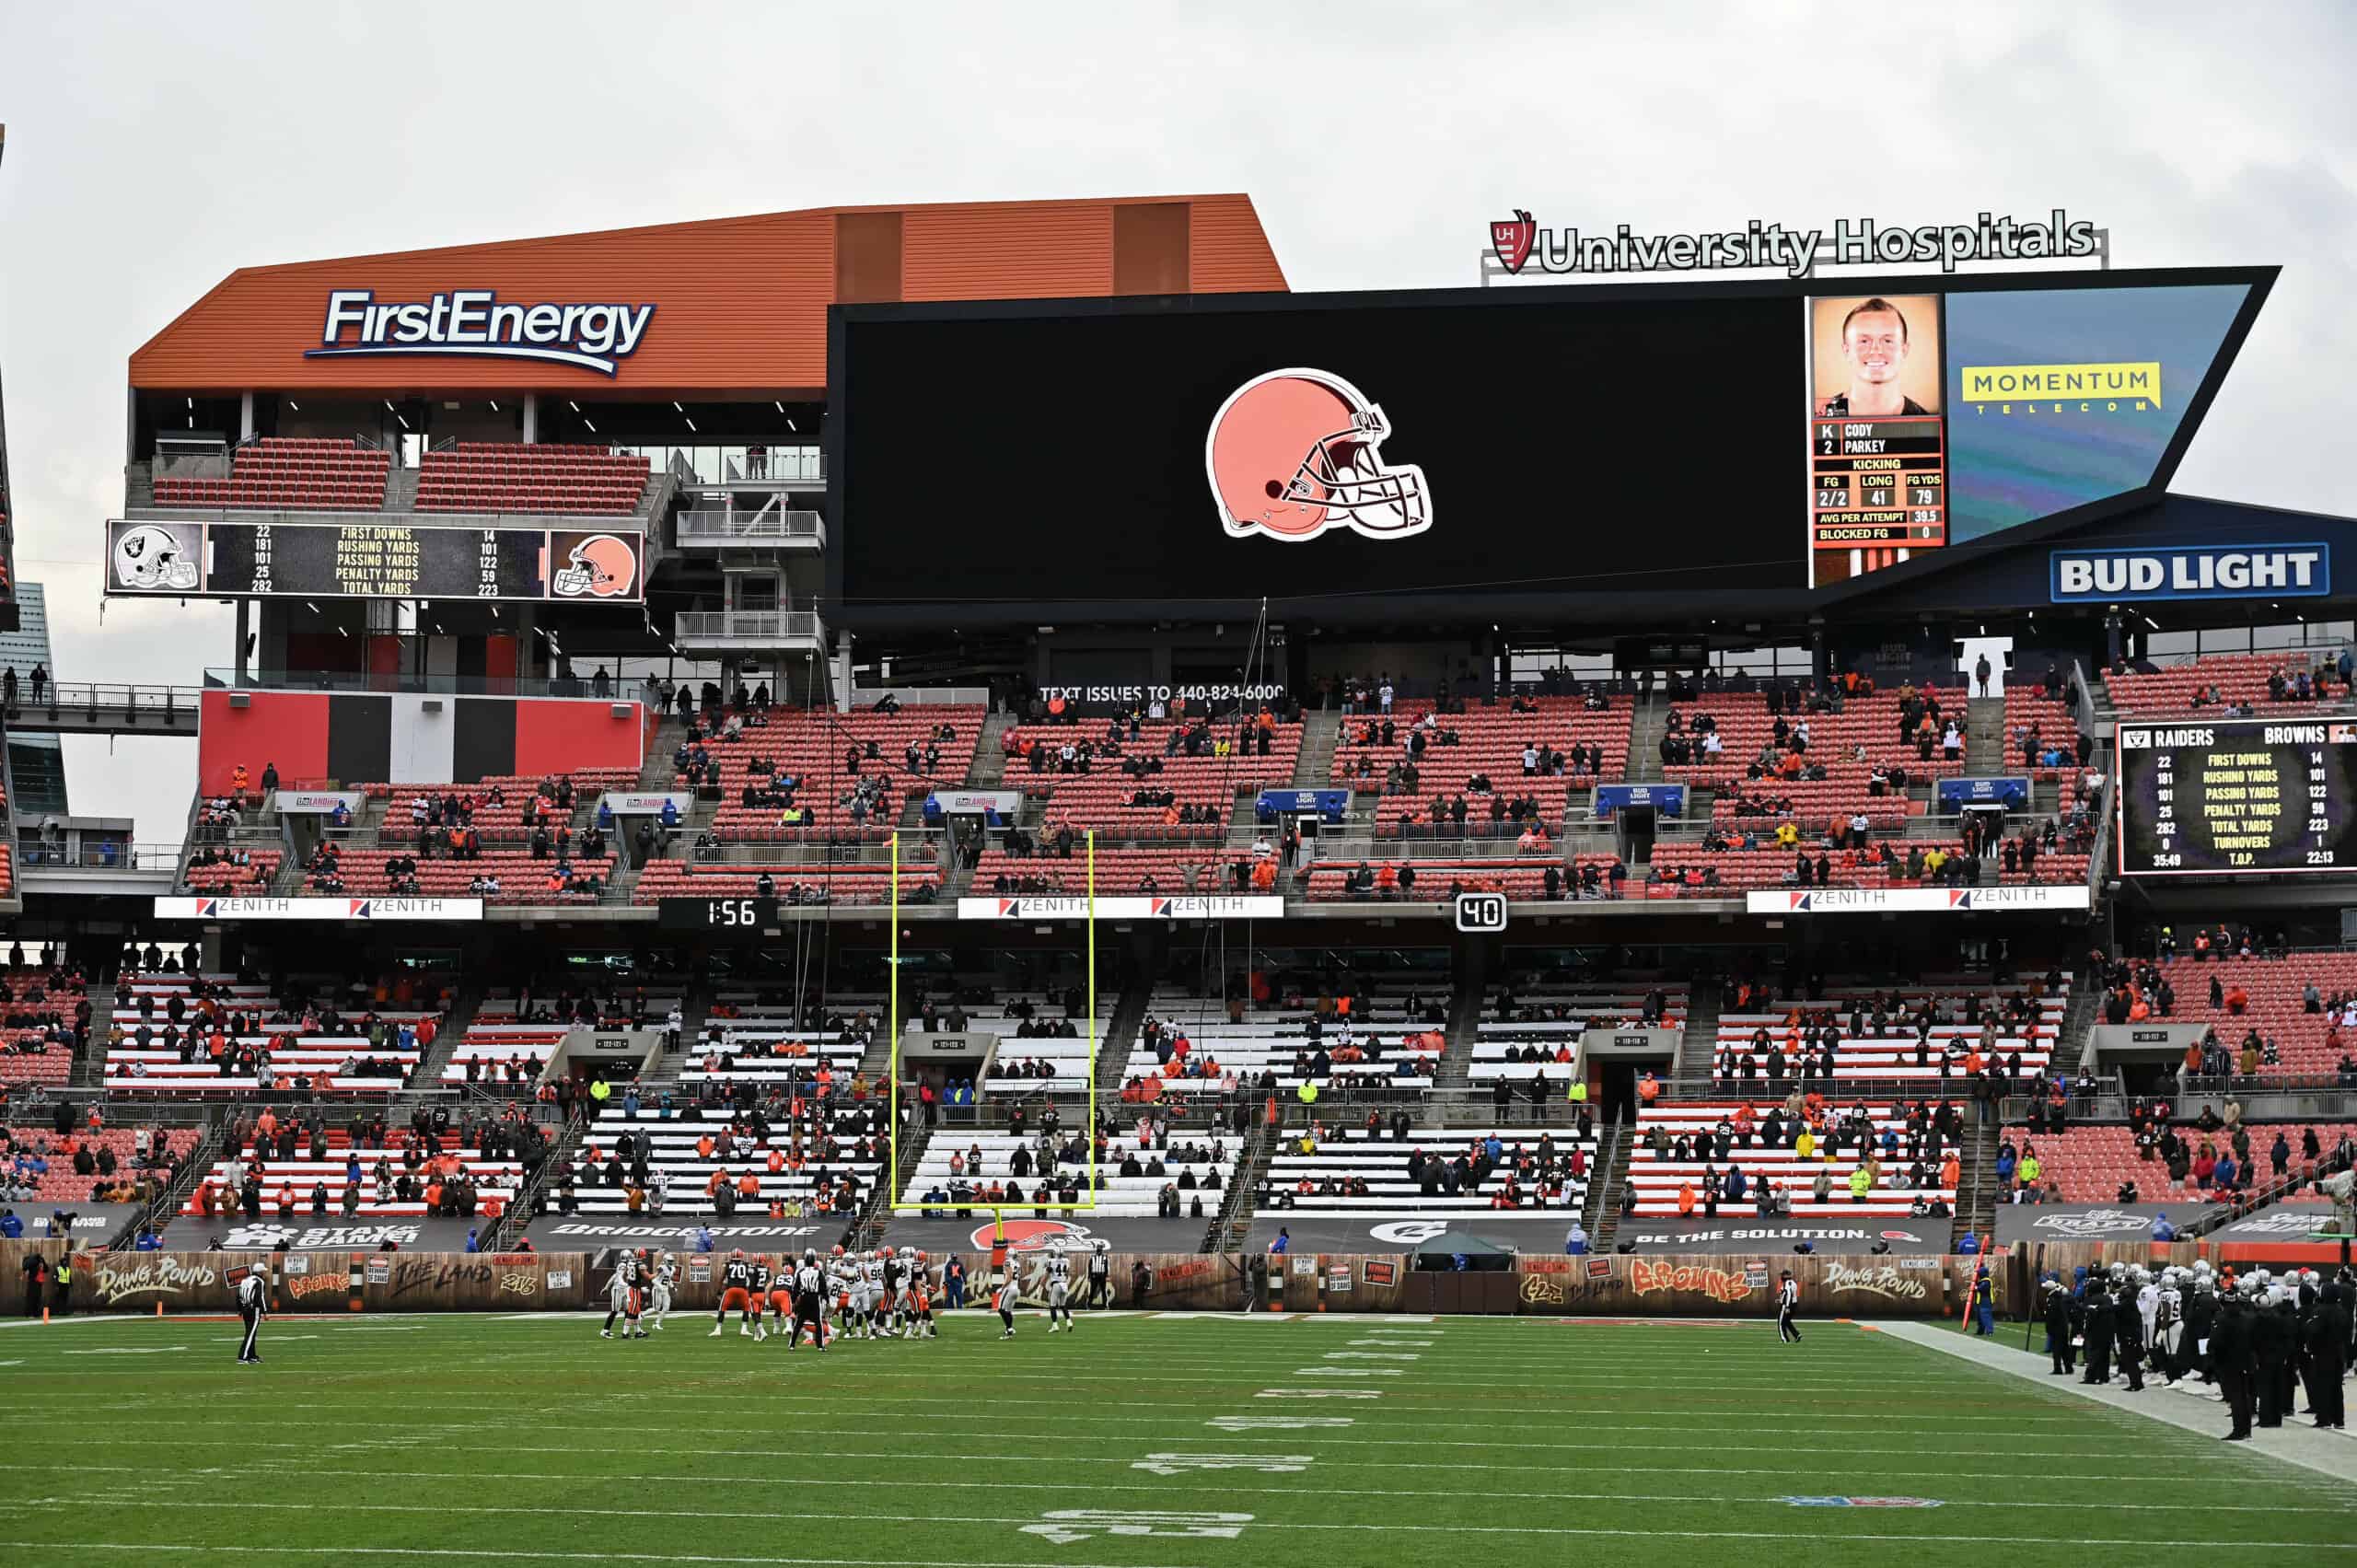 The Cleveland Browns attempt unsuccessfully a field goal against the Las Vegas Raiders at FirstEnergy Stadium on November 1, 2020 in Cleveland, Ohio.